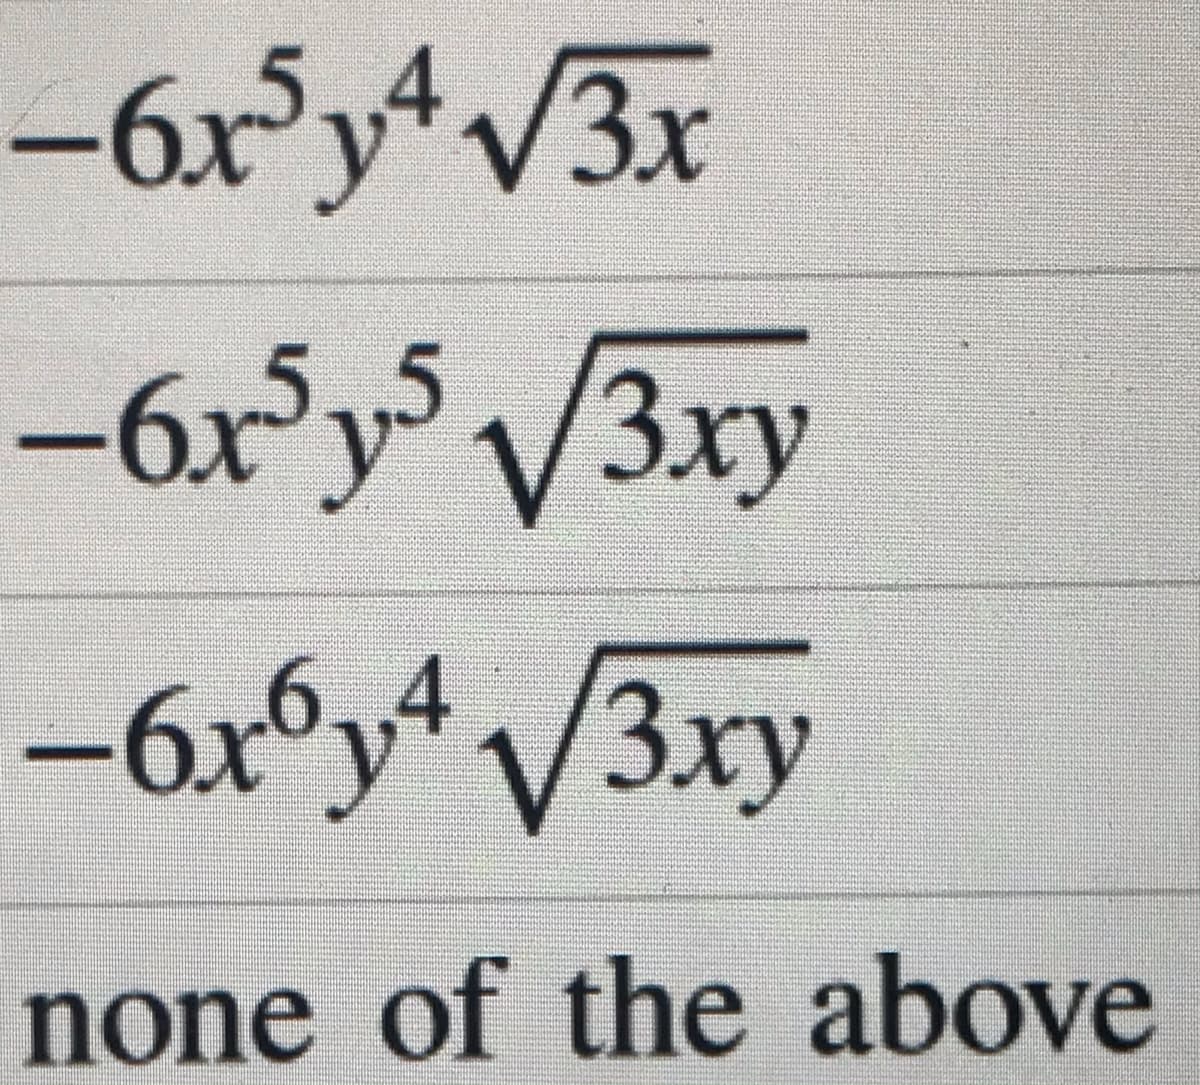 -6x°yV3x
-6x³y
-6ణ్న్సV/3xy
-6xºy* /3xy
Зху
none of the above
